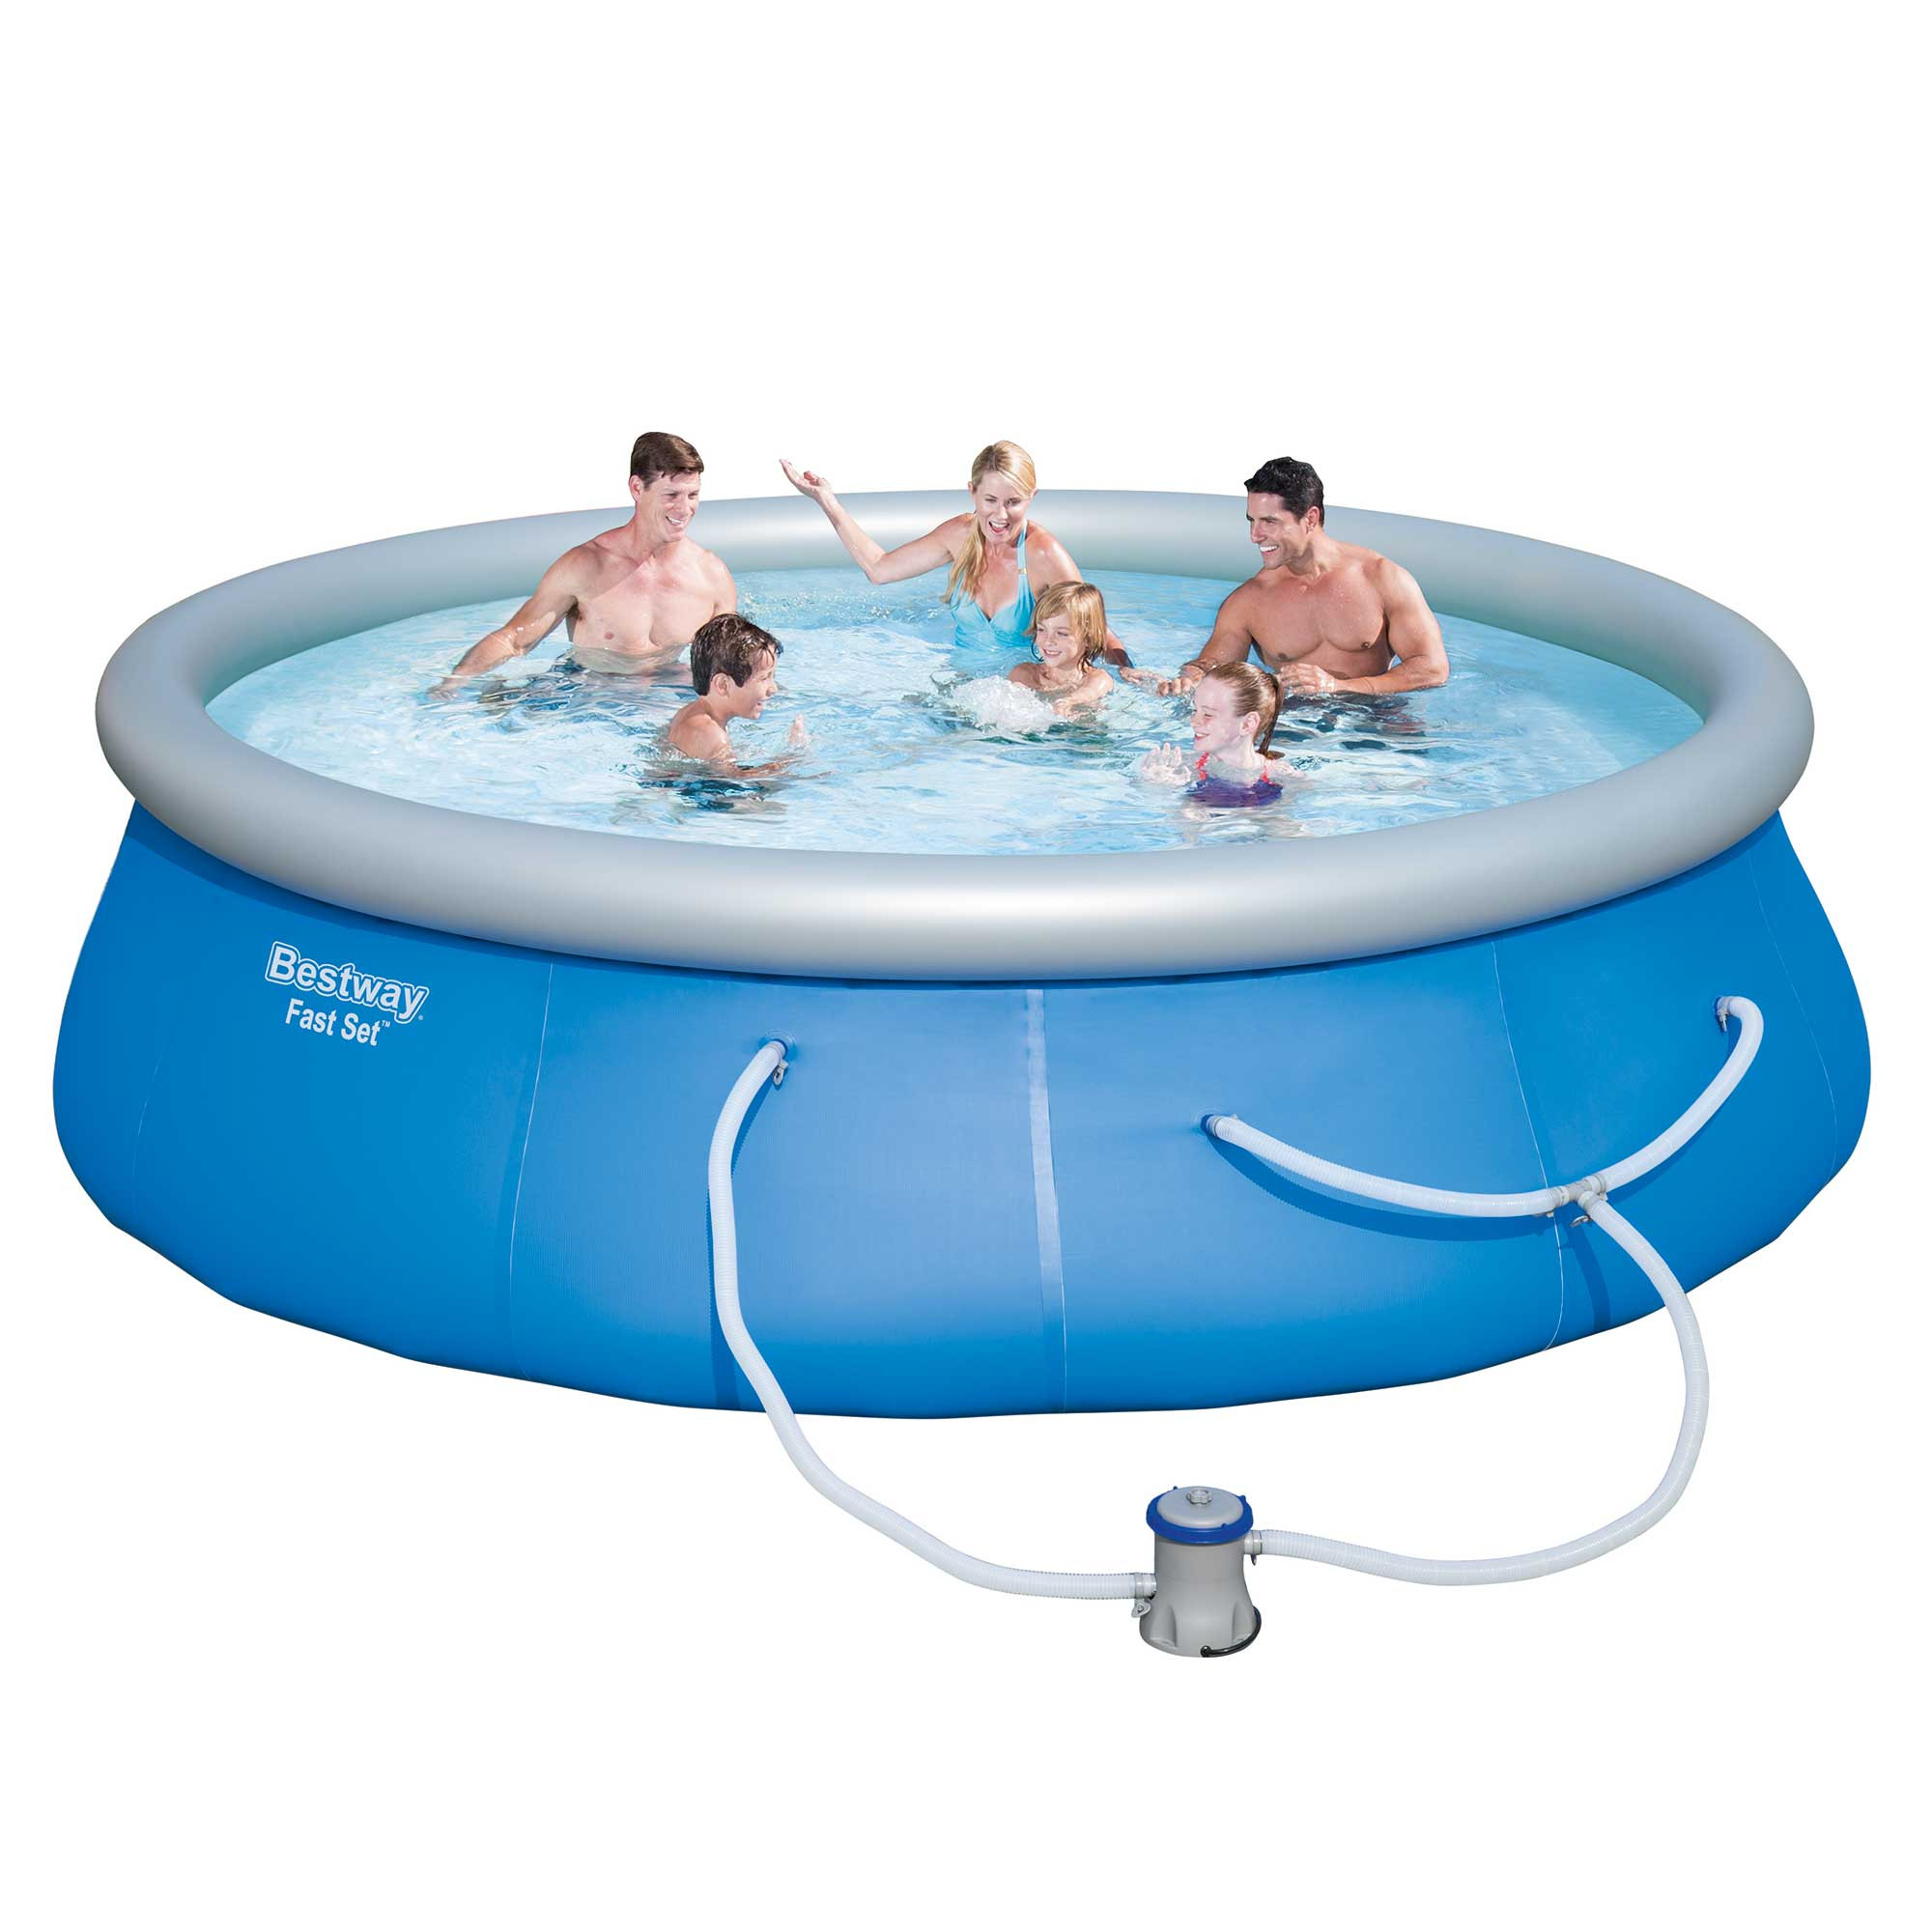 Walmart Above Ground Swimming Pool
 Bestway 12 x 36" Fast Set Inflatable Ground